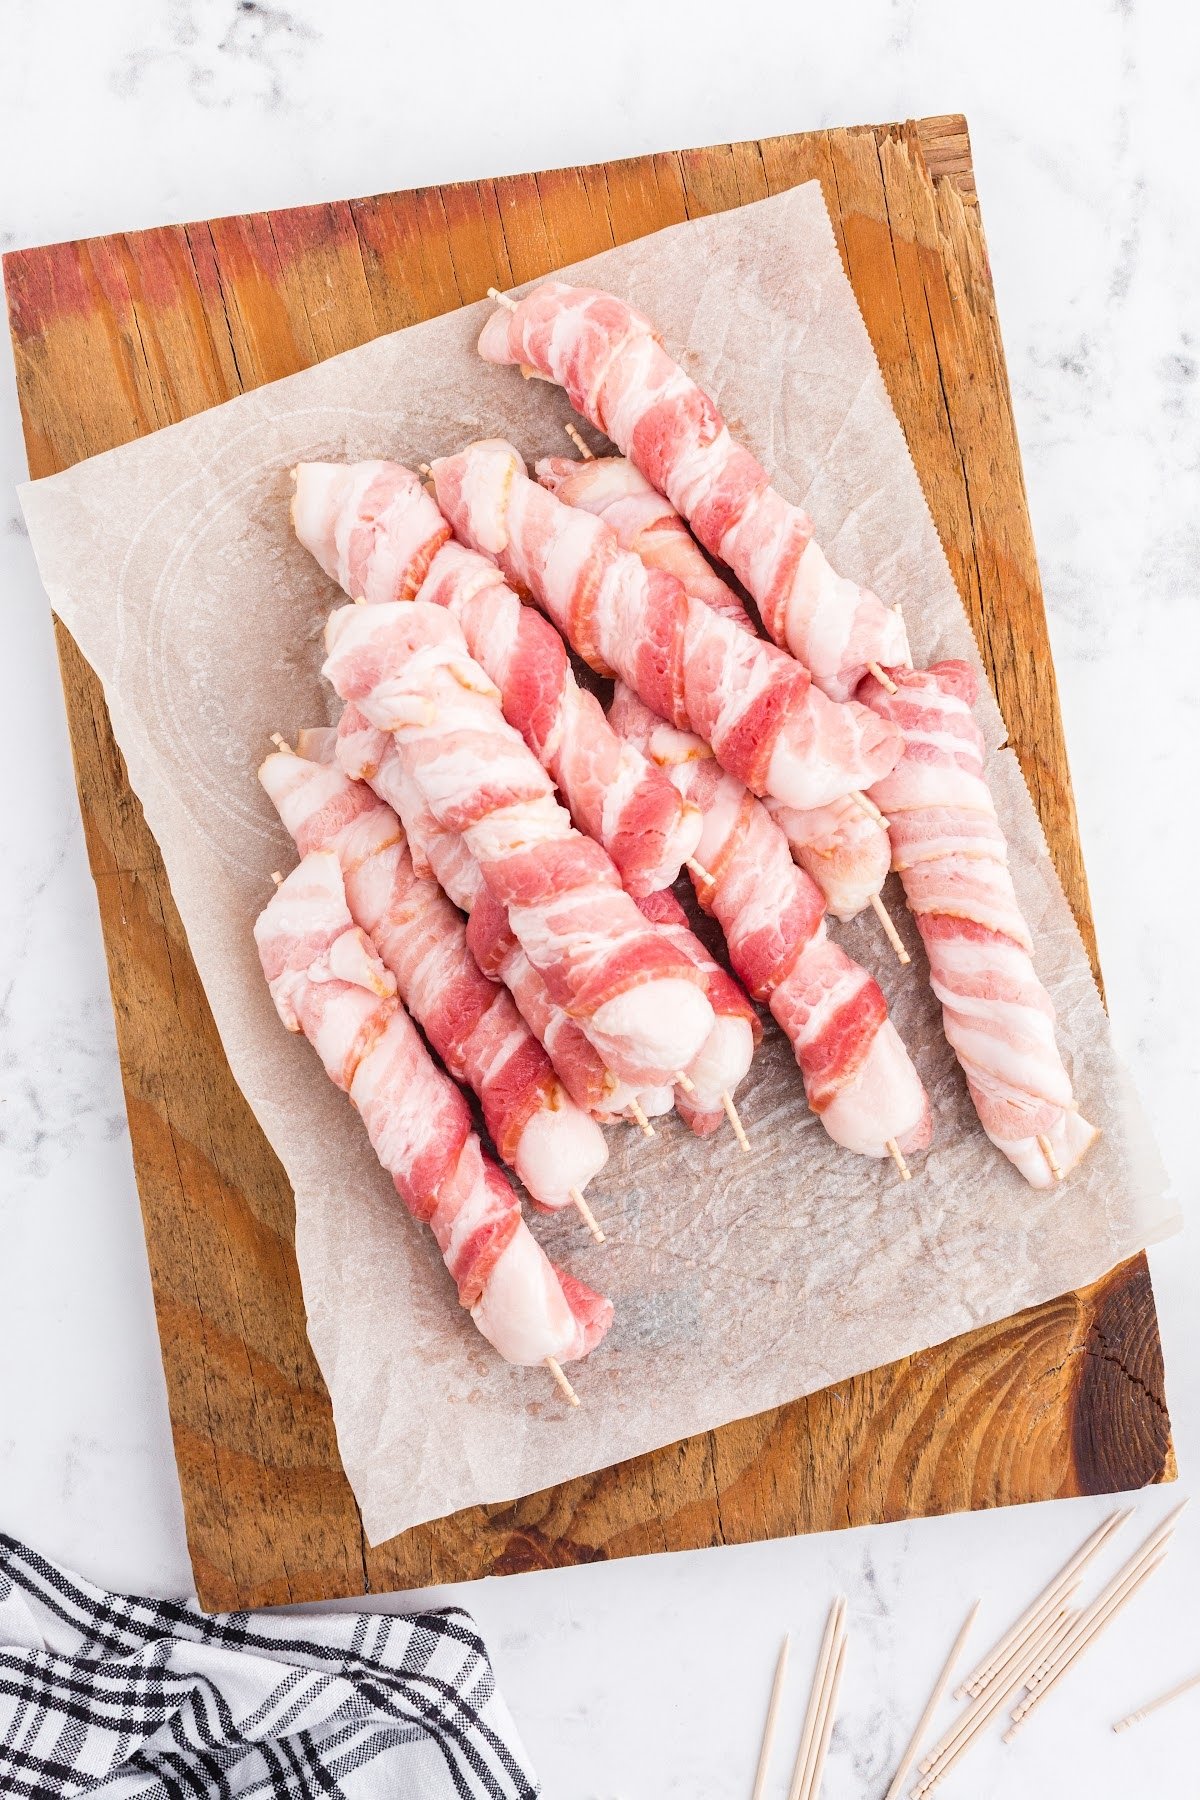 Raw bacon wrapped mozzarella sticks on a cutting board before frying.